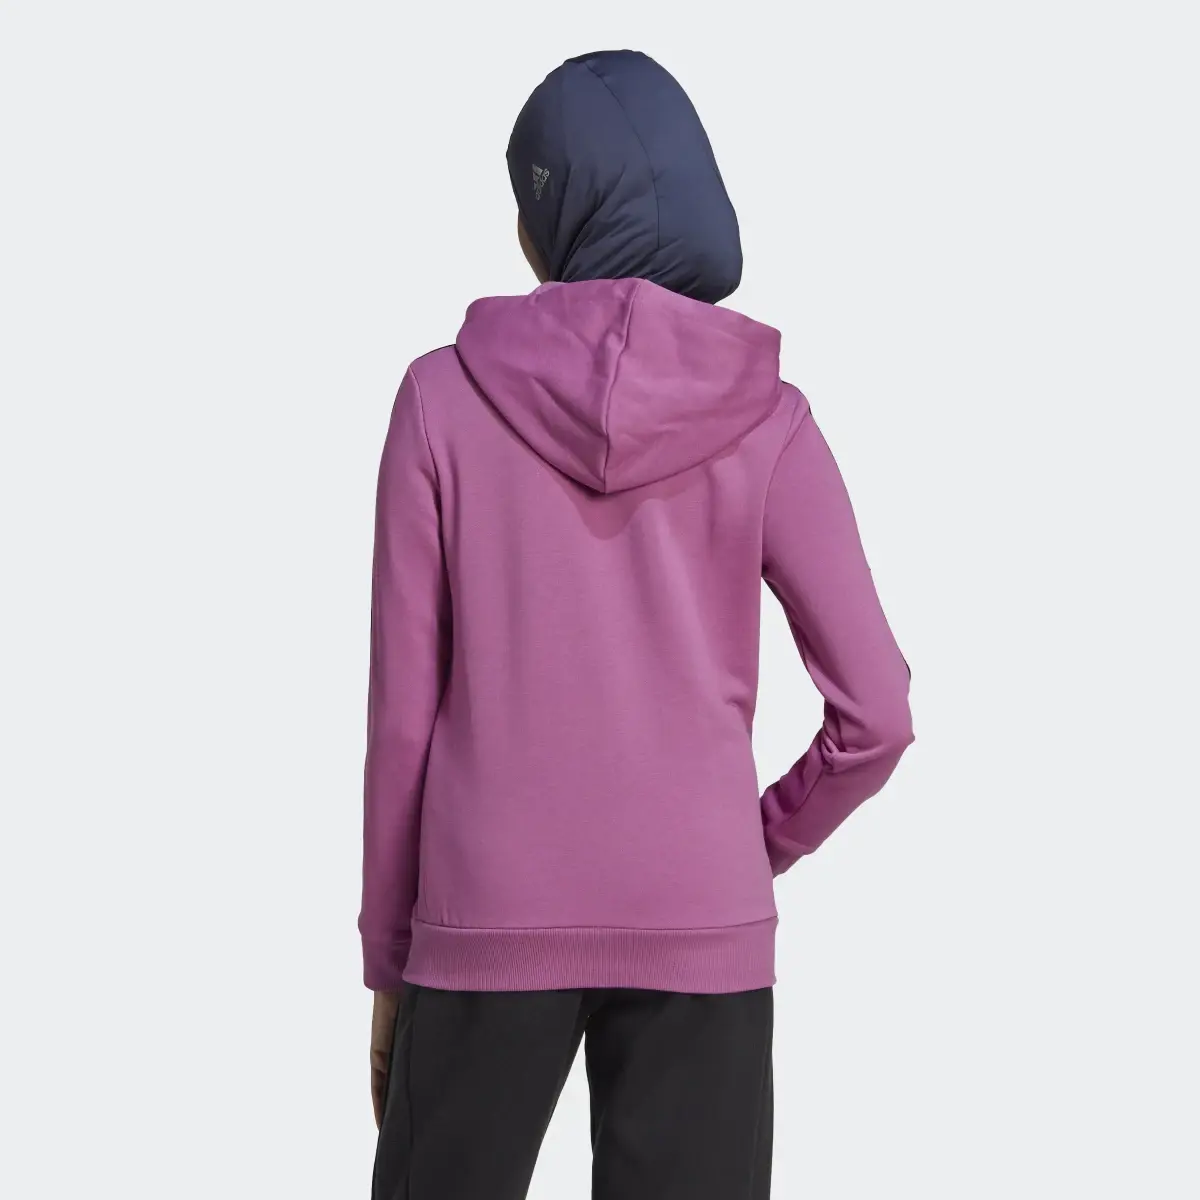 Adidas Essentials French Terry 3-Stripes Full-Zip Hoodie. 3